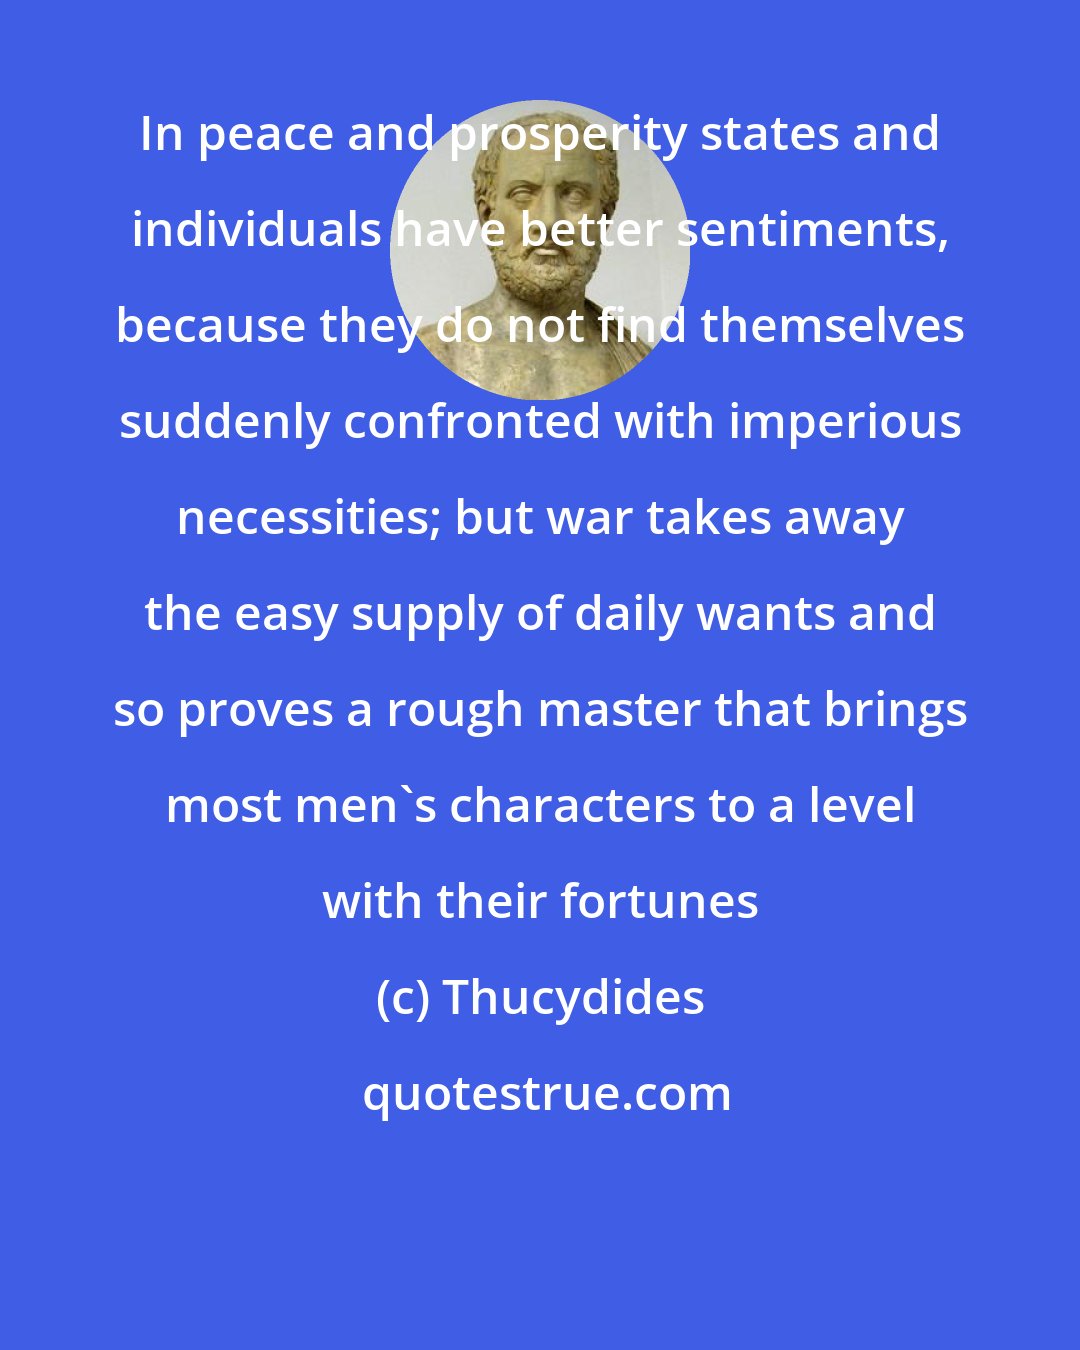 Thucydides: In peace and prosperity states and individuals have better sentiments, because they do not find themselves suddenly confronted with imperious necessities; but war takes away the easy supply of daily wants and so proves a rough master that brings most men's characters to a level with their fortunes